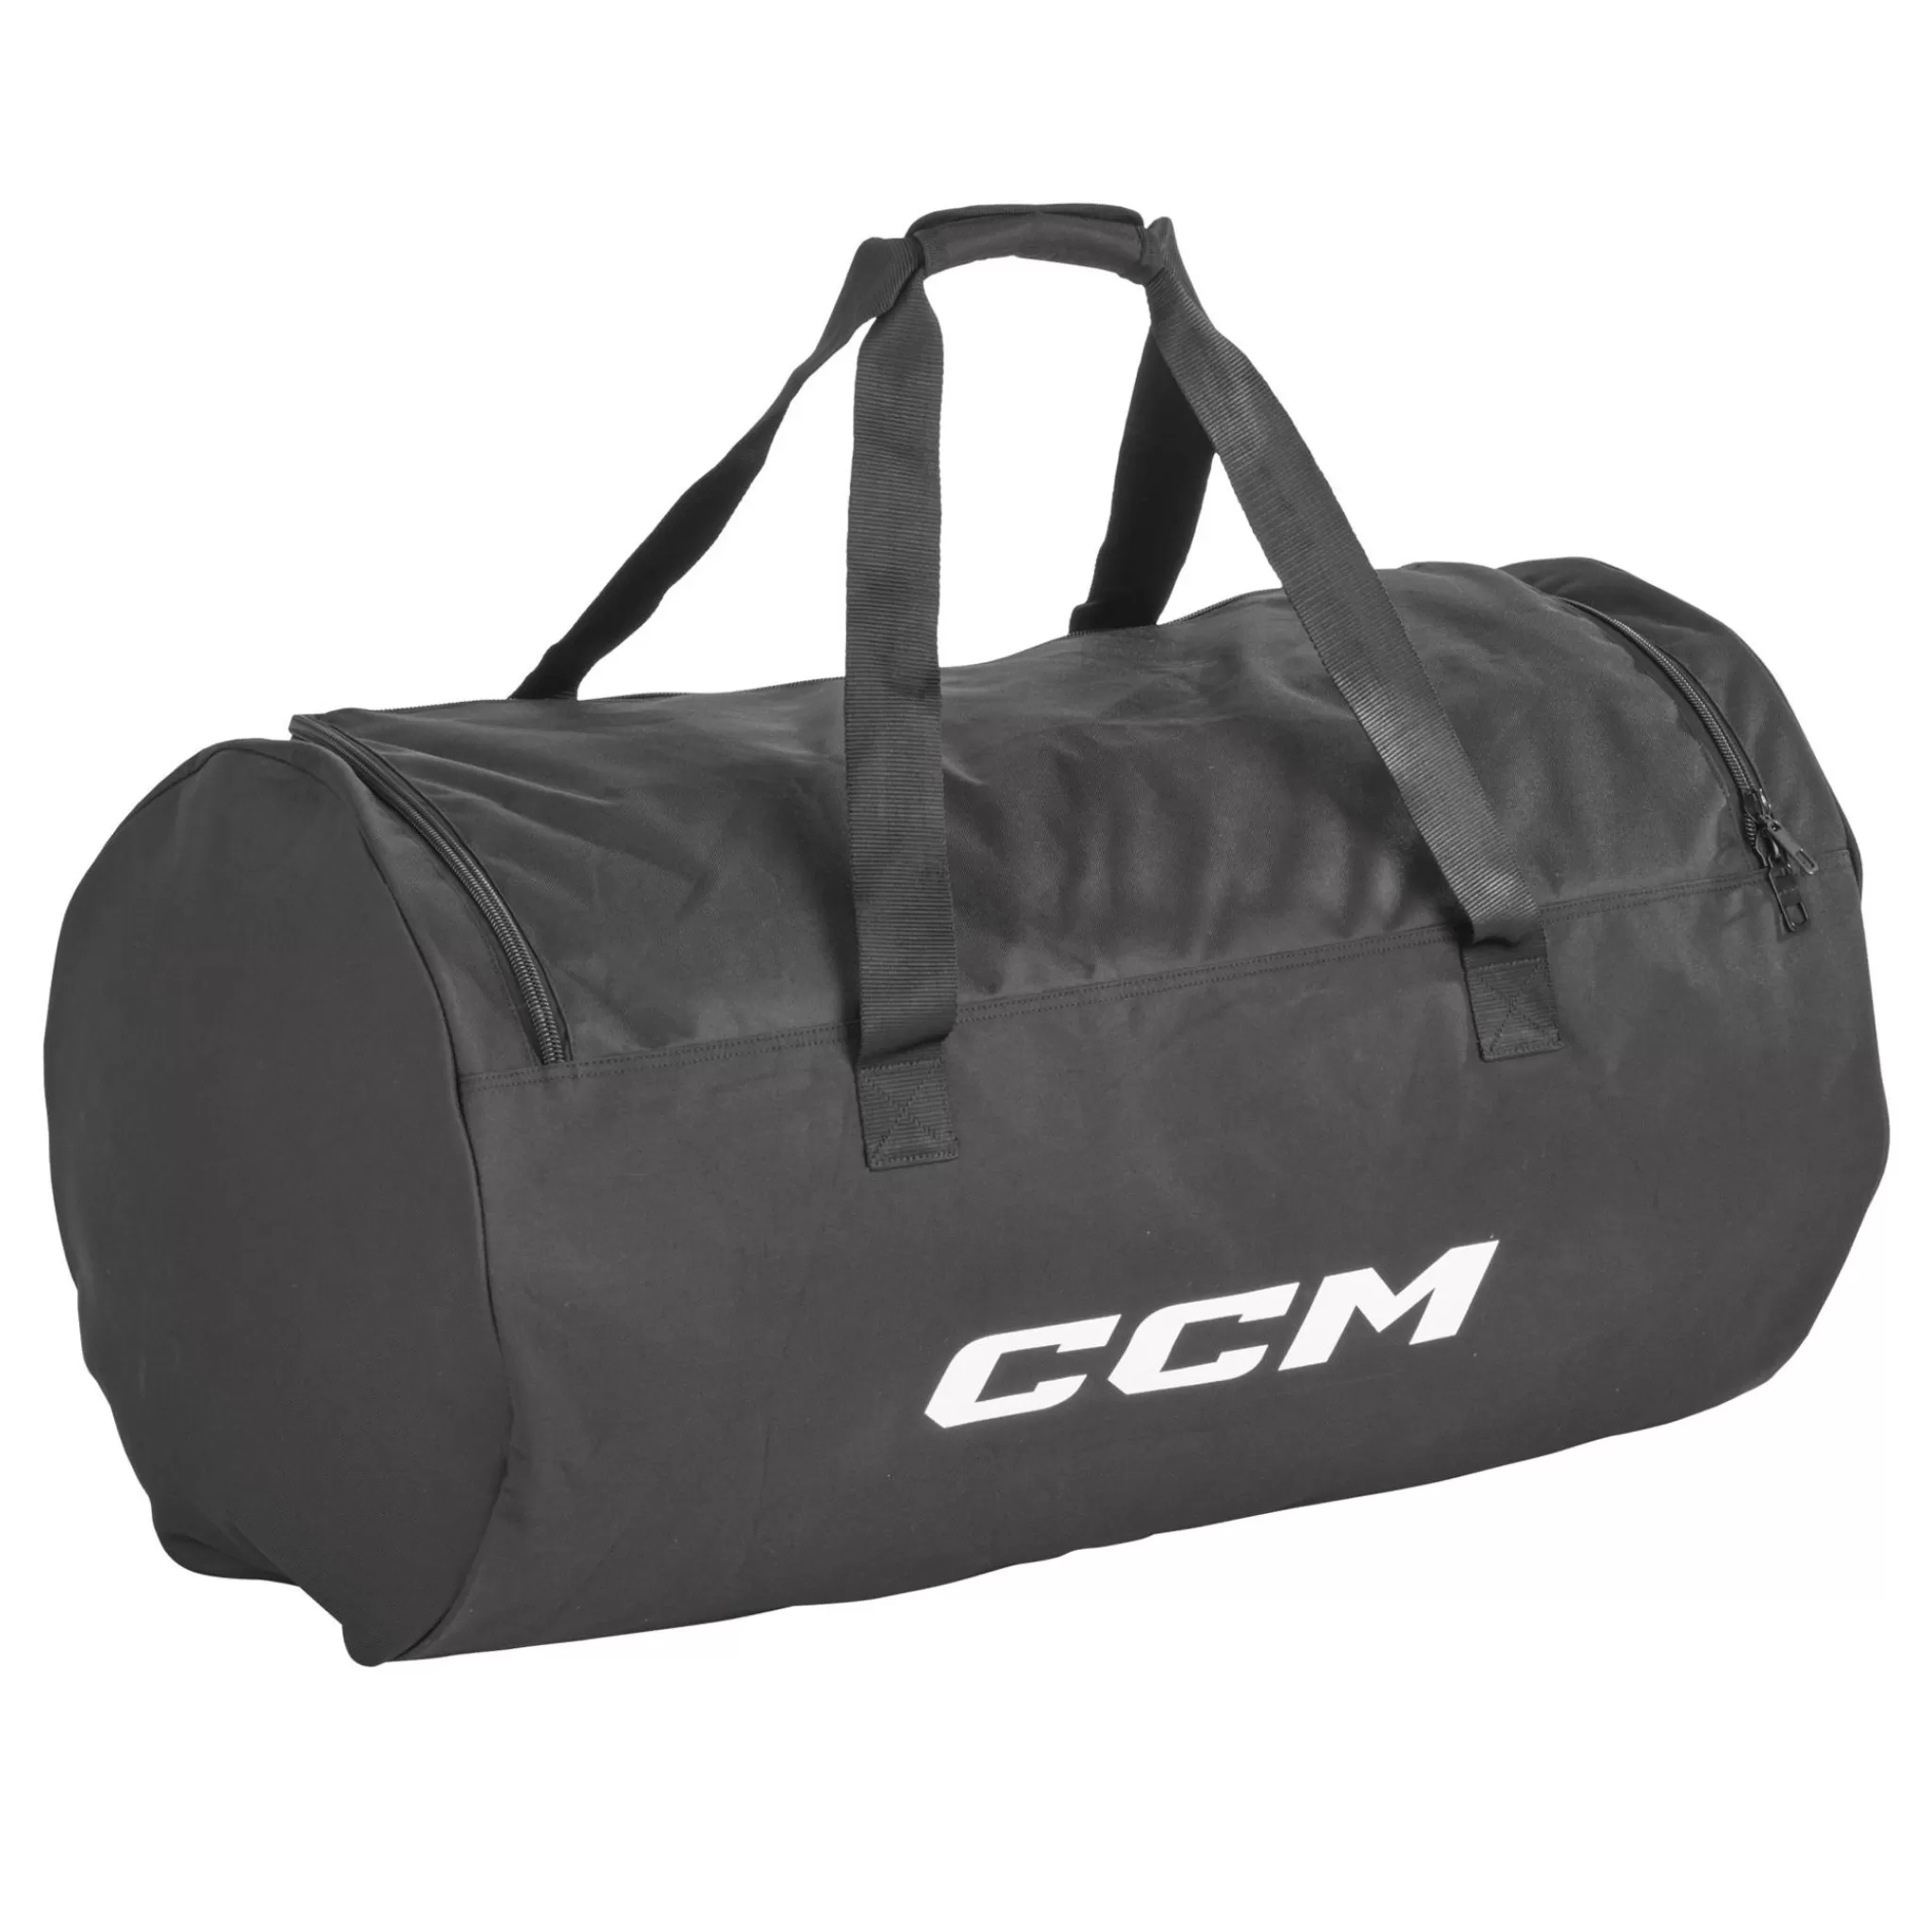 Outlet ccm 410 Player Basic Carry Bag, Hockeybag